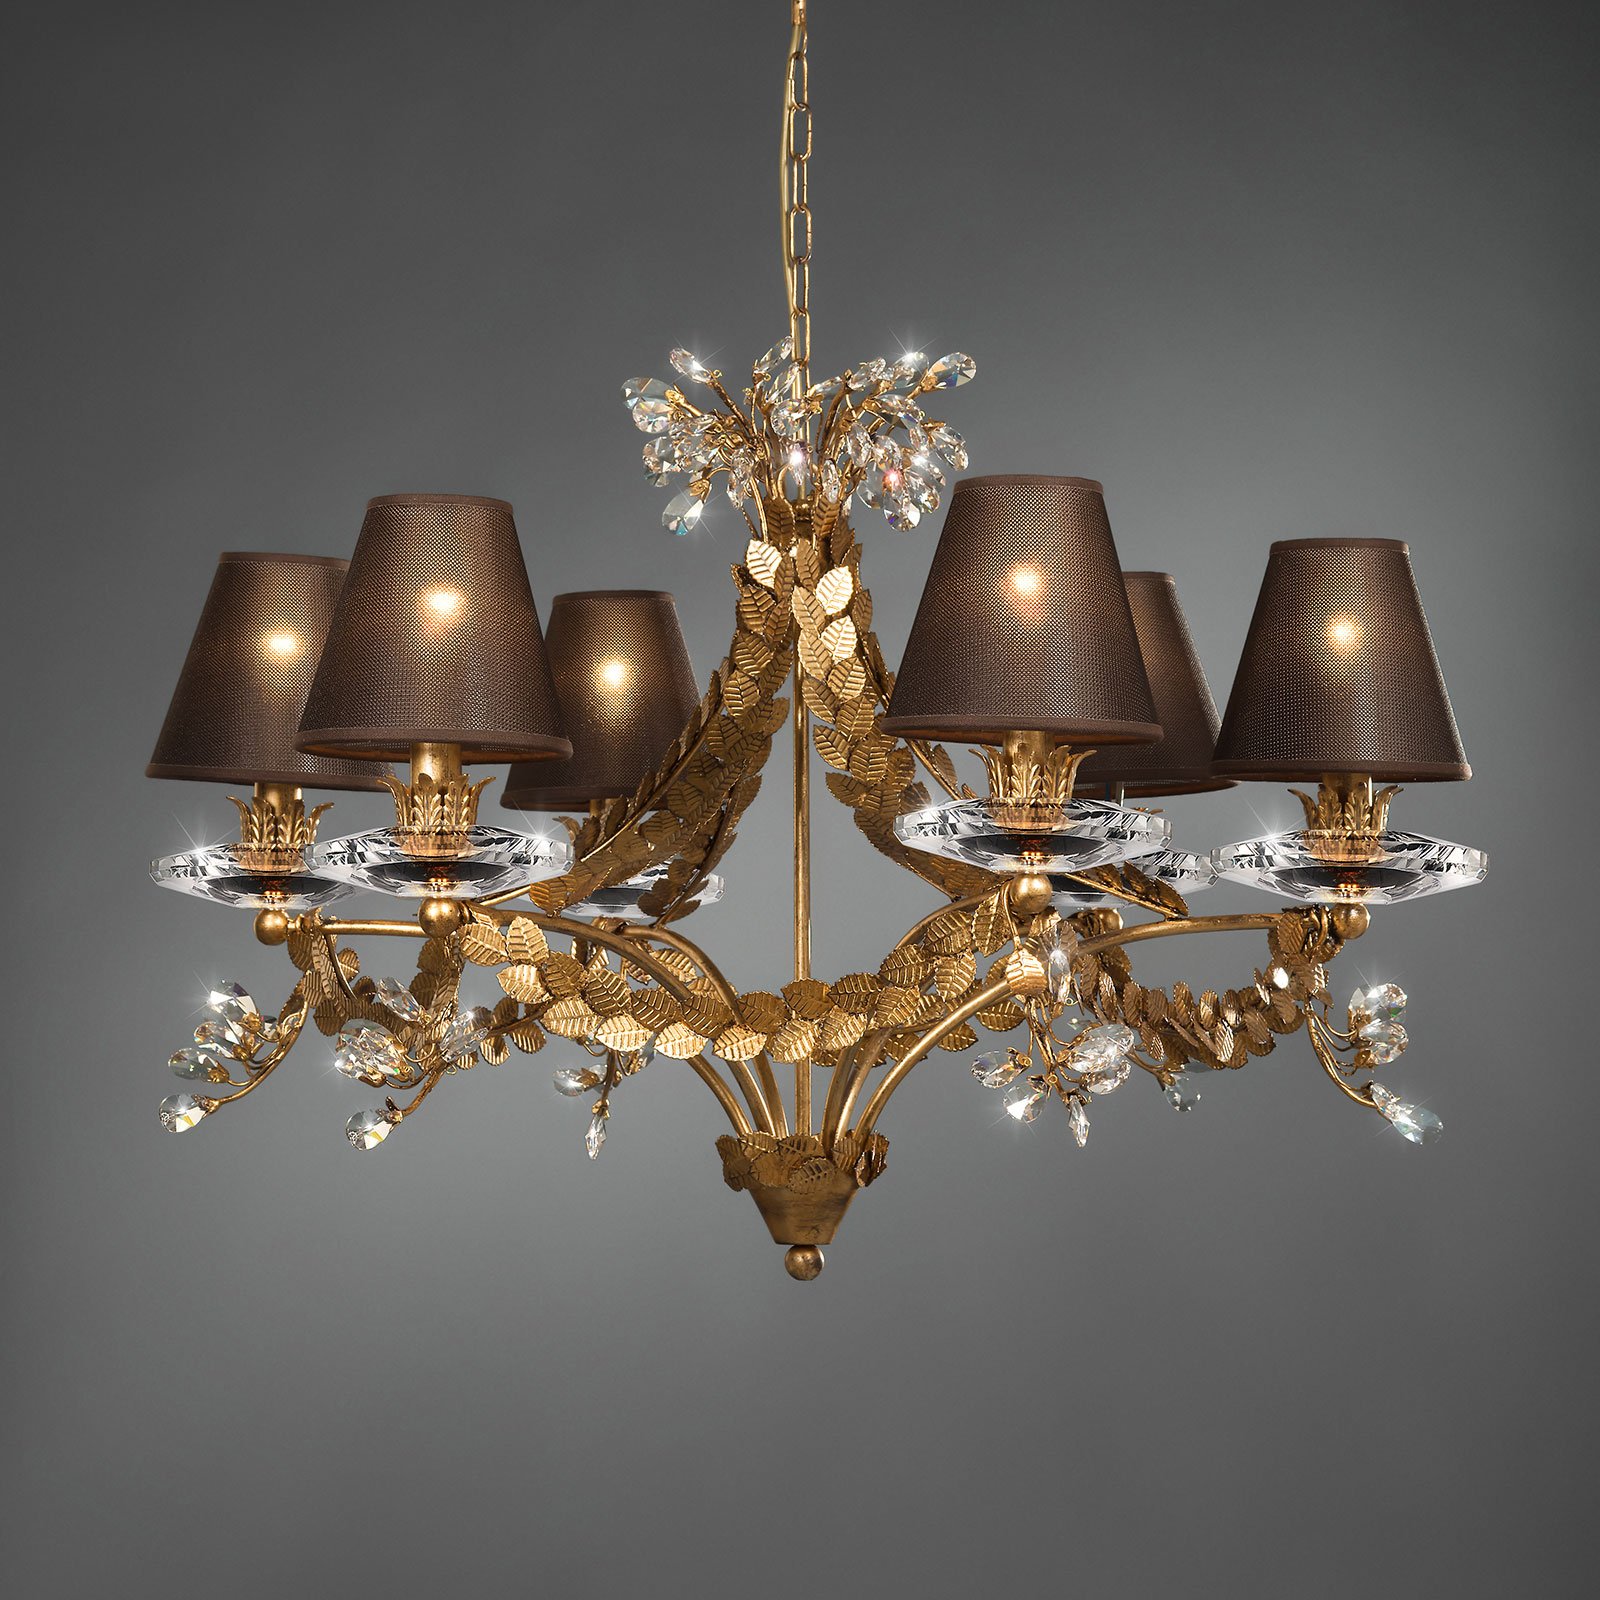 Foliage - noble chandelier with leaf decoration